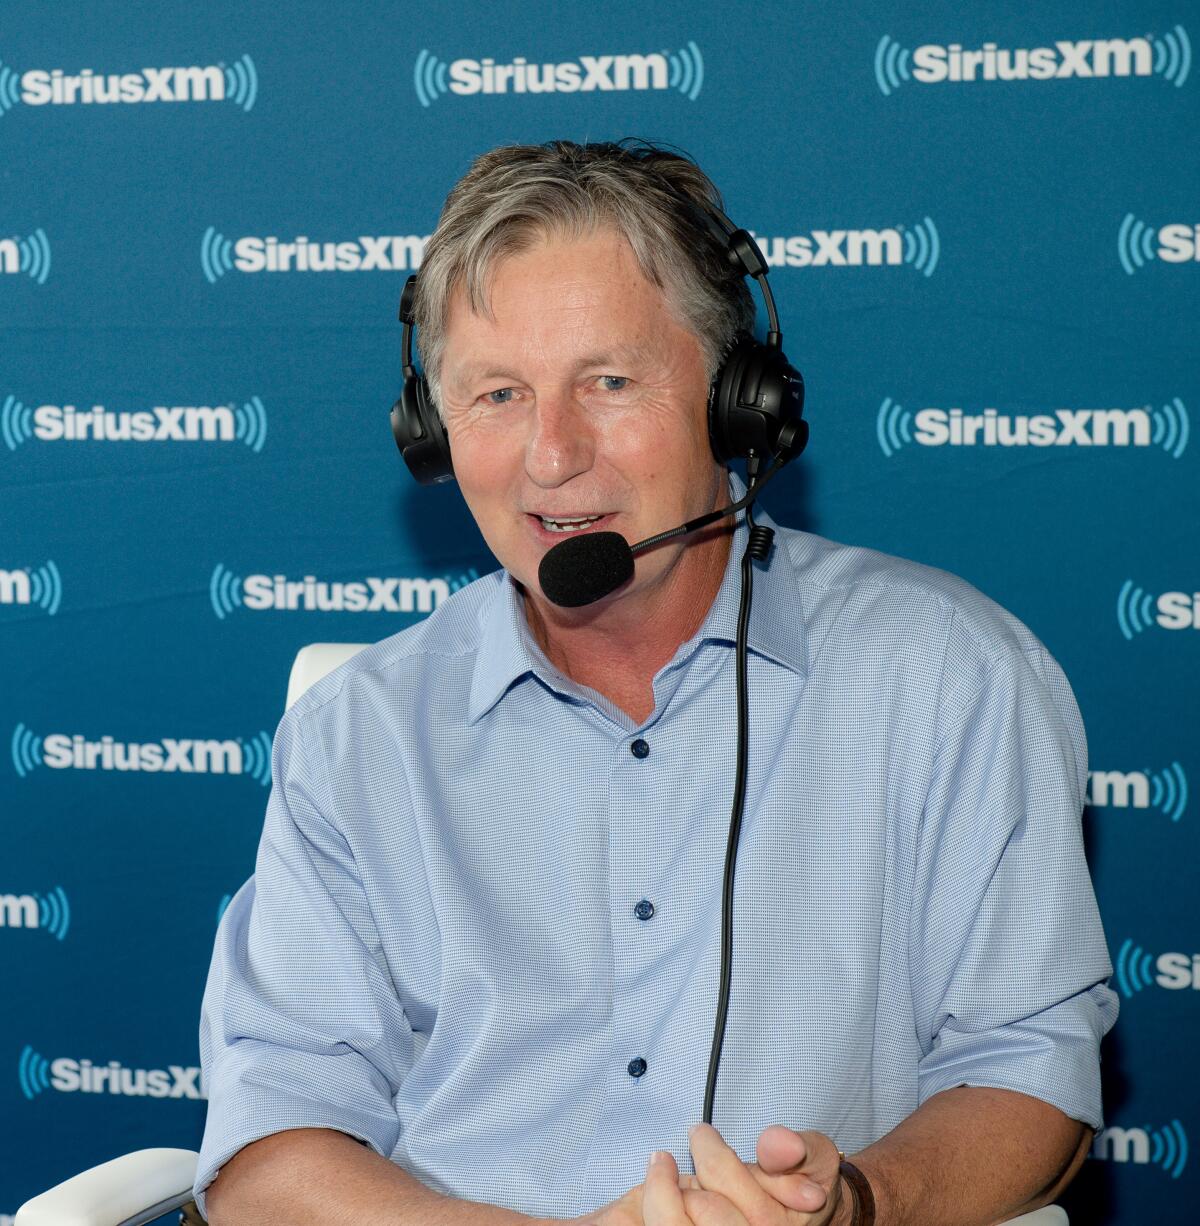 Brandel Chamblee of Golf Channel at the 2019 Masters.